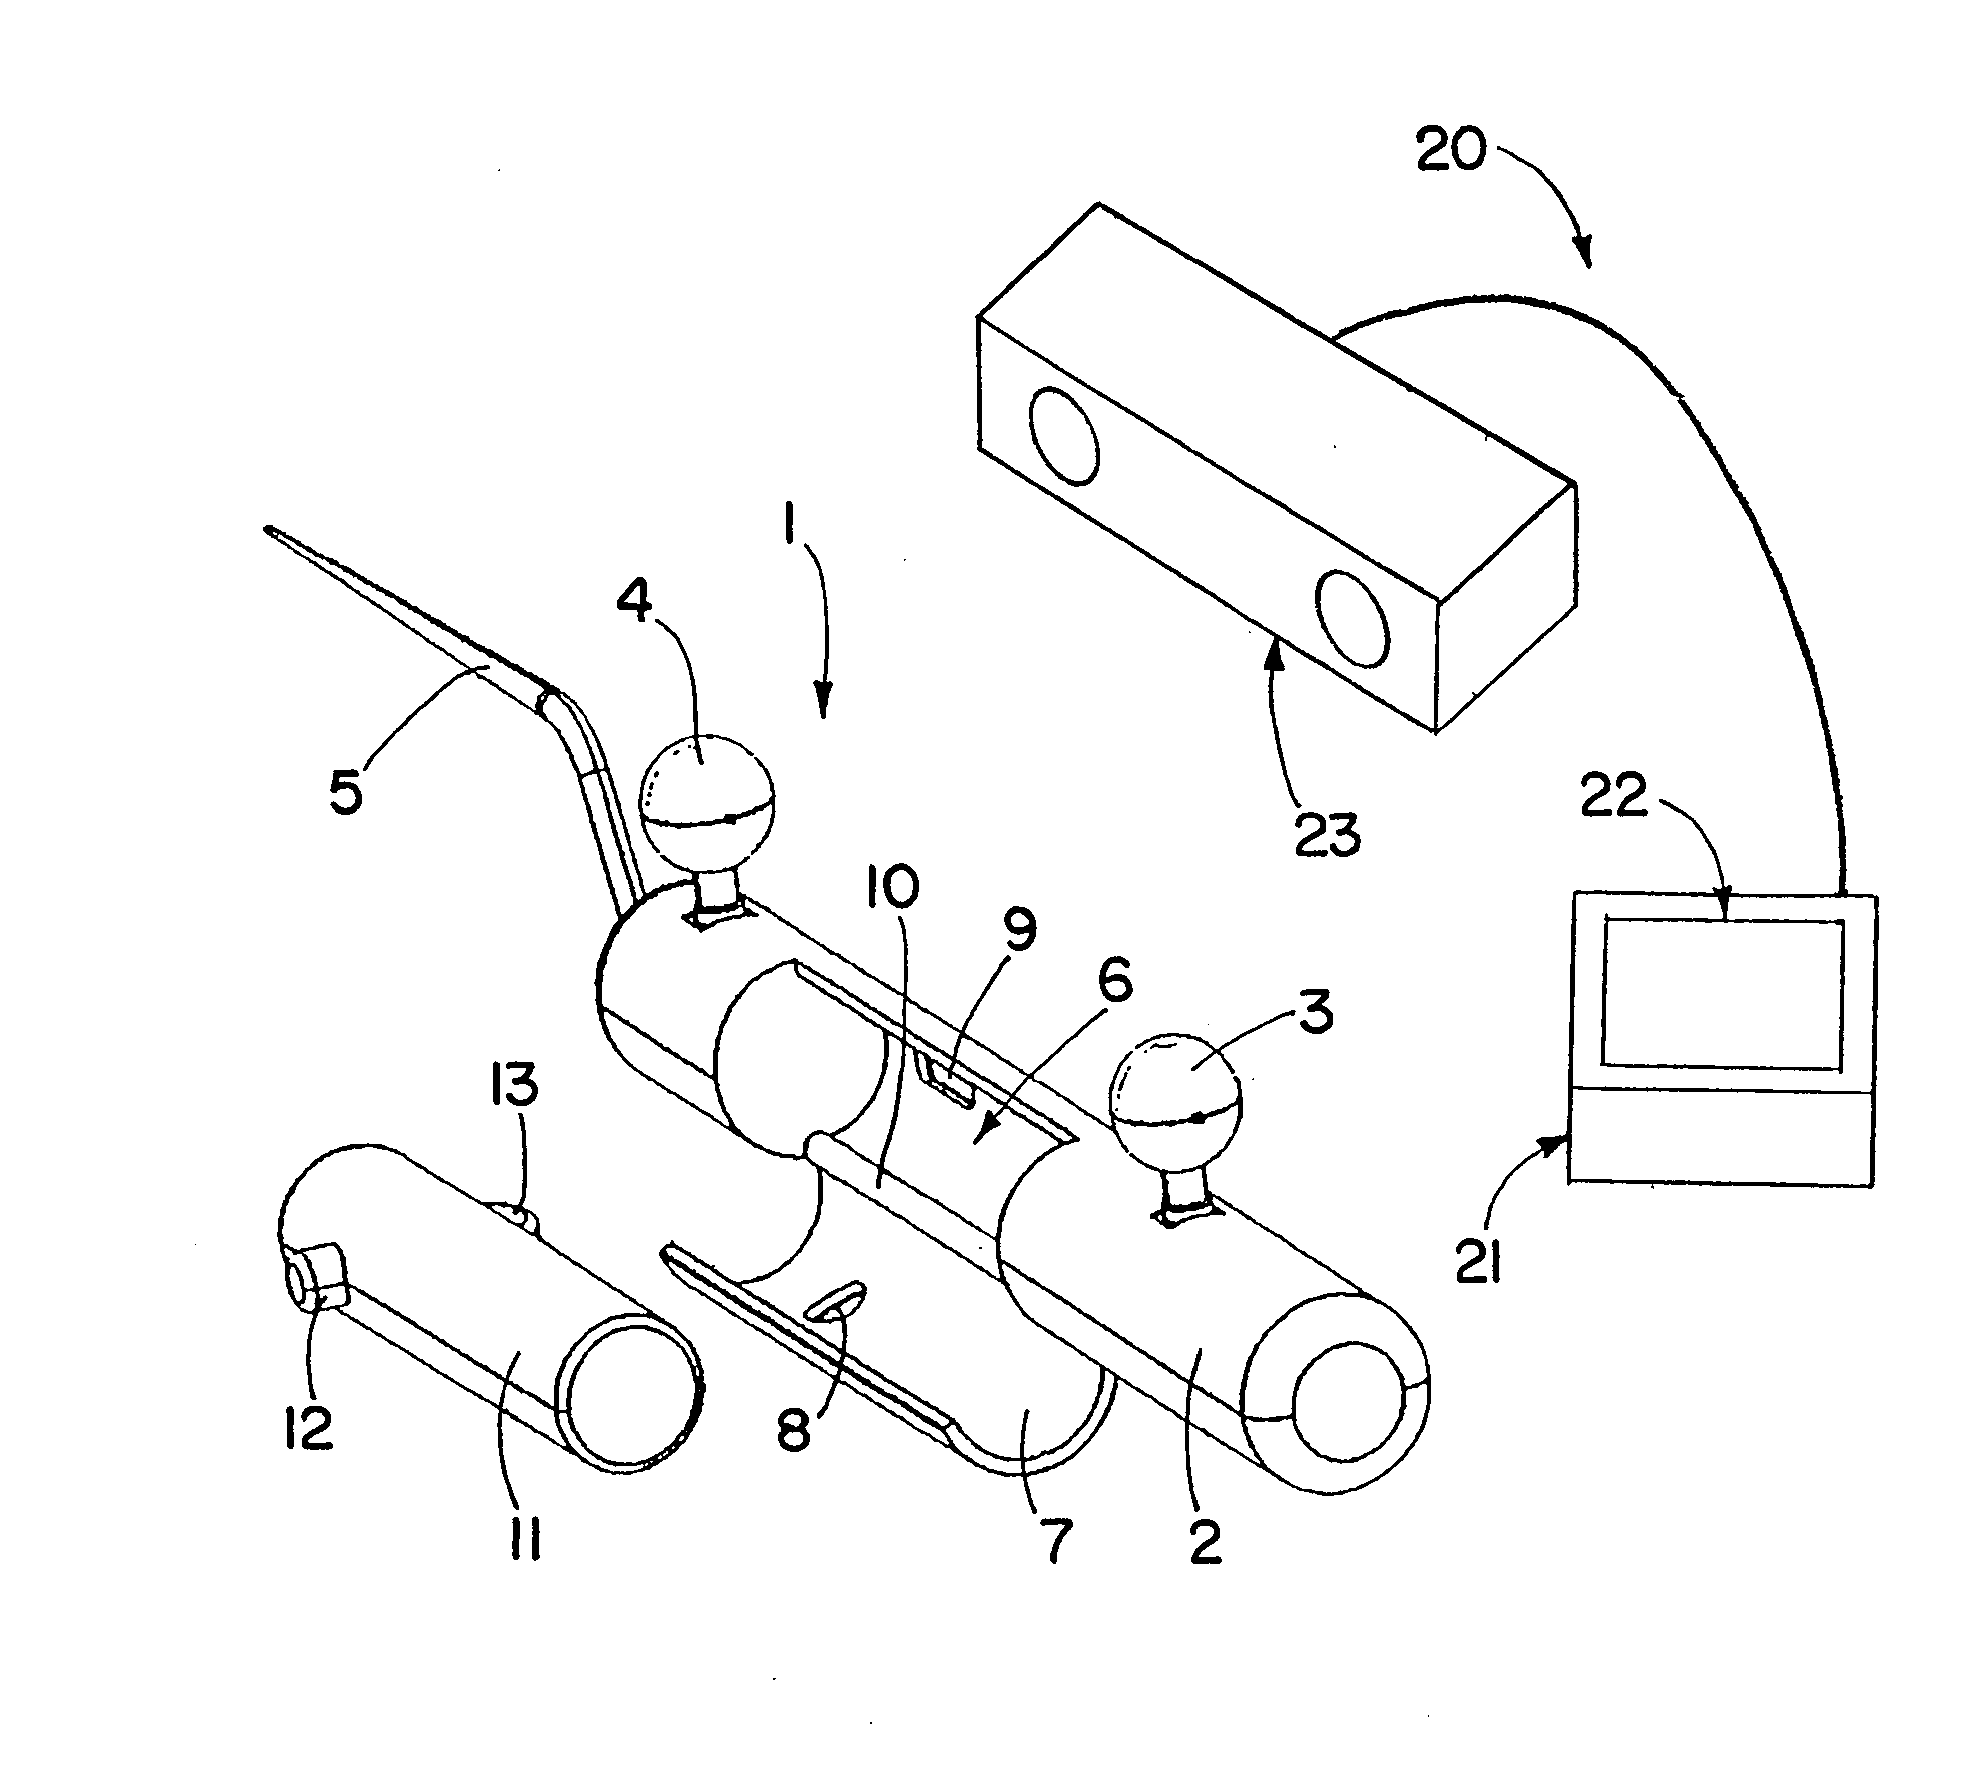 Medical instrument having a separate transmitter for controlling medical treatment software